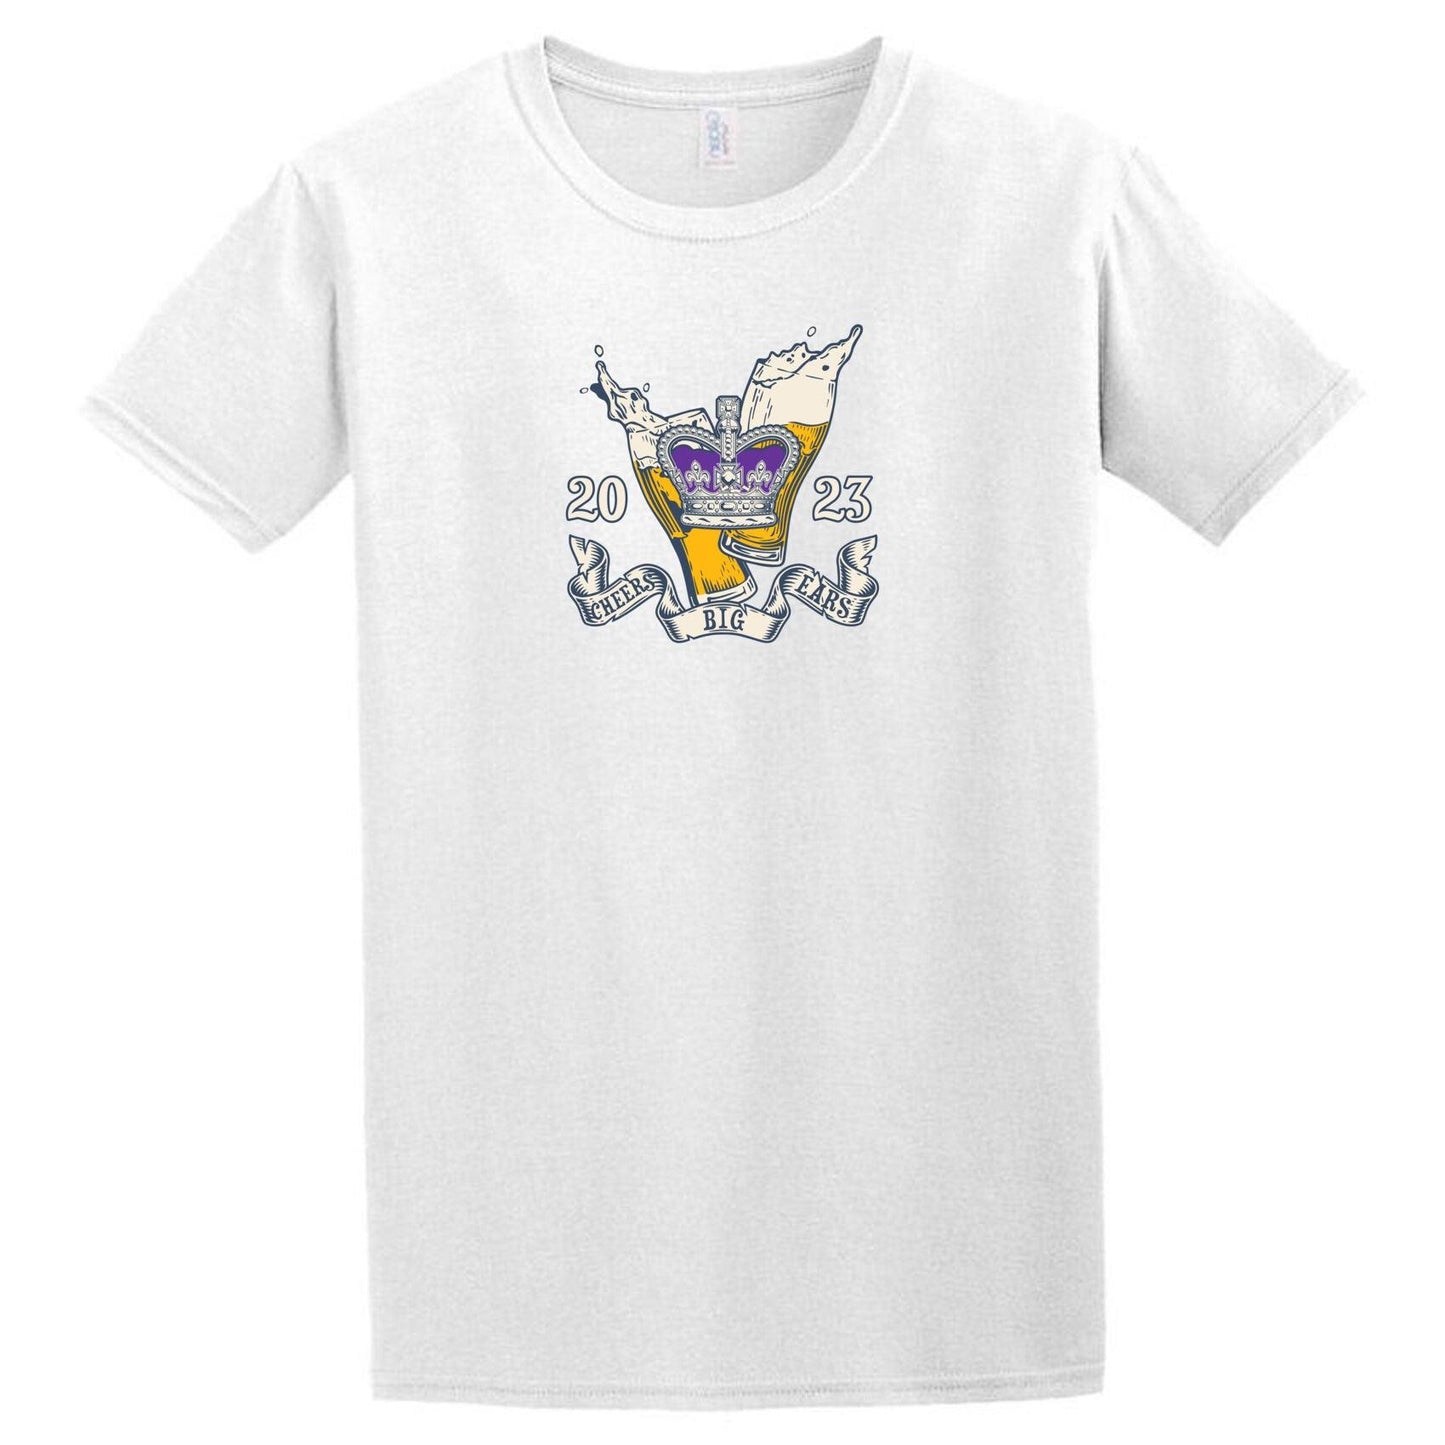 A historical satire Cheers Big Ears T-Shirt by Twisted Gifts with a crest on it.